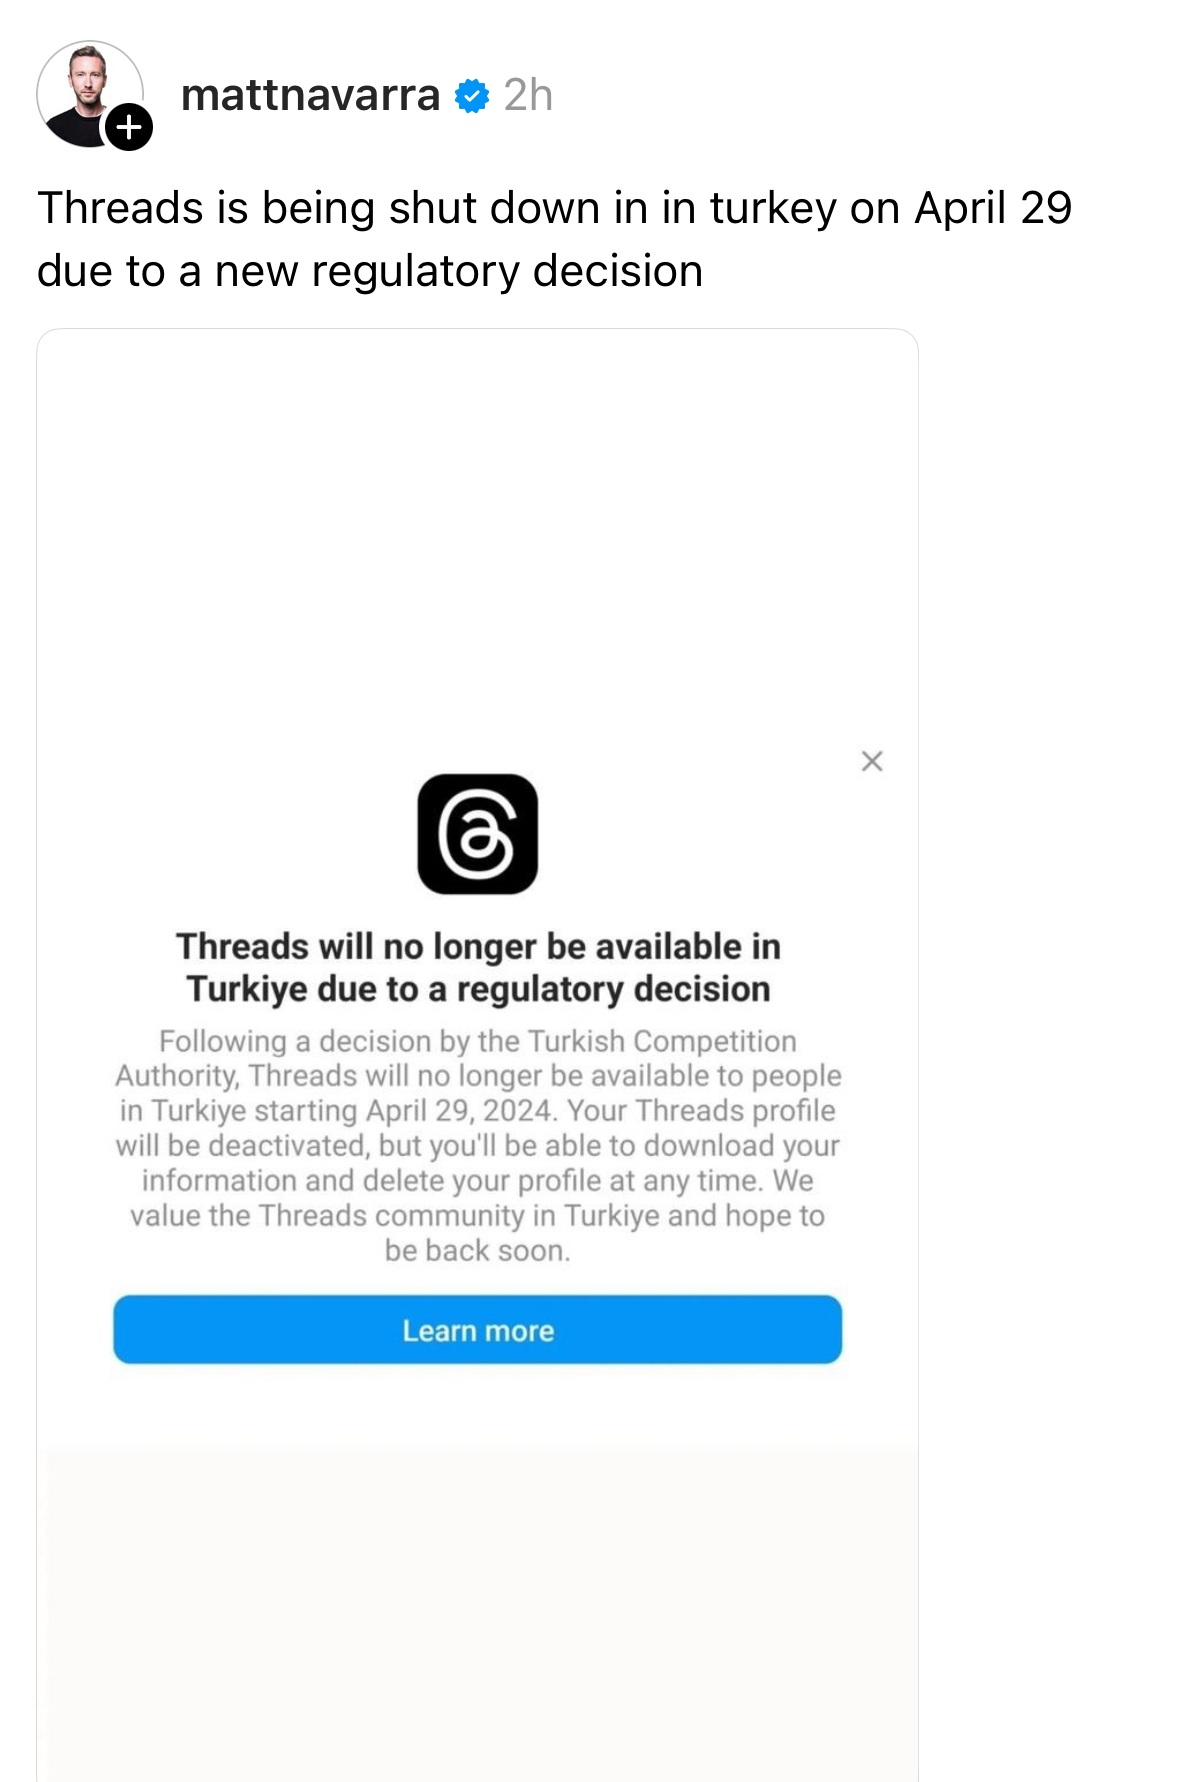 mattnavarra from Threads: Threads is being shut down in in turkey on April 29 due to a new regulatory decision